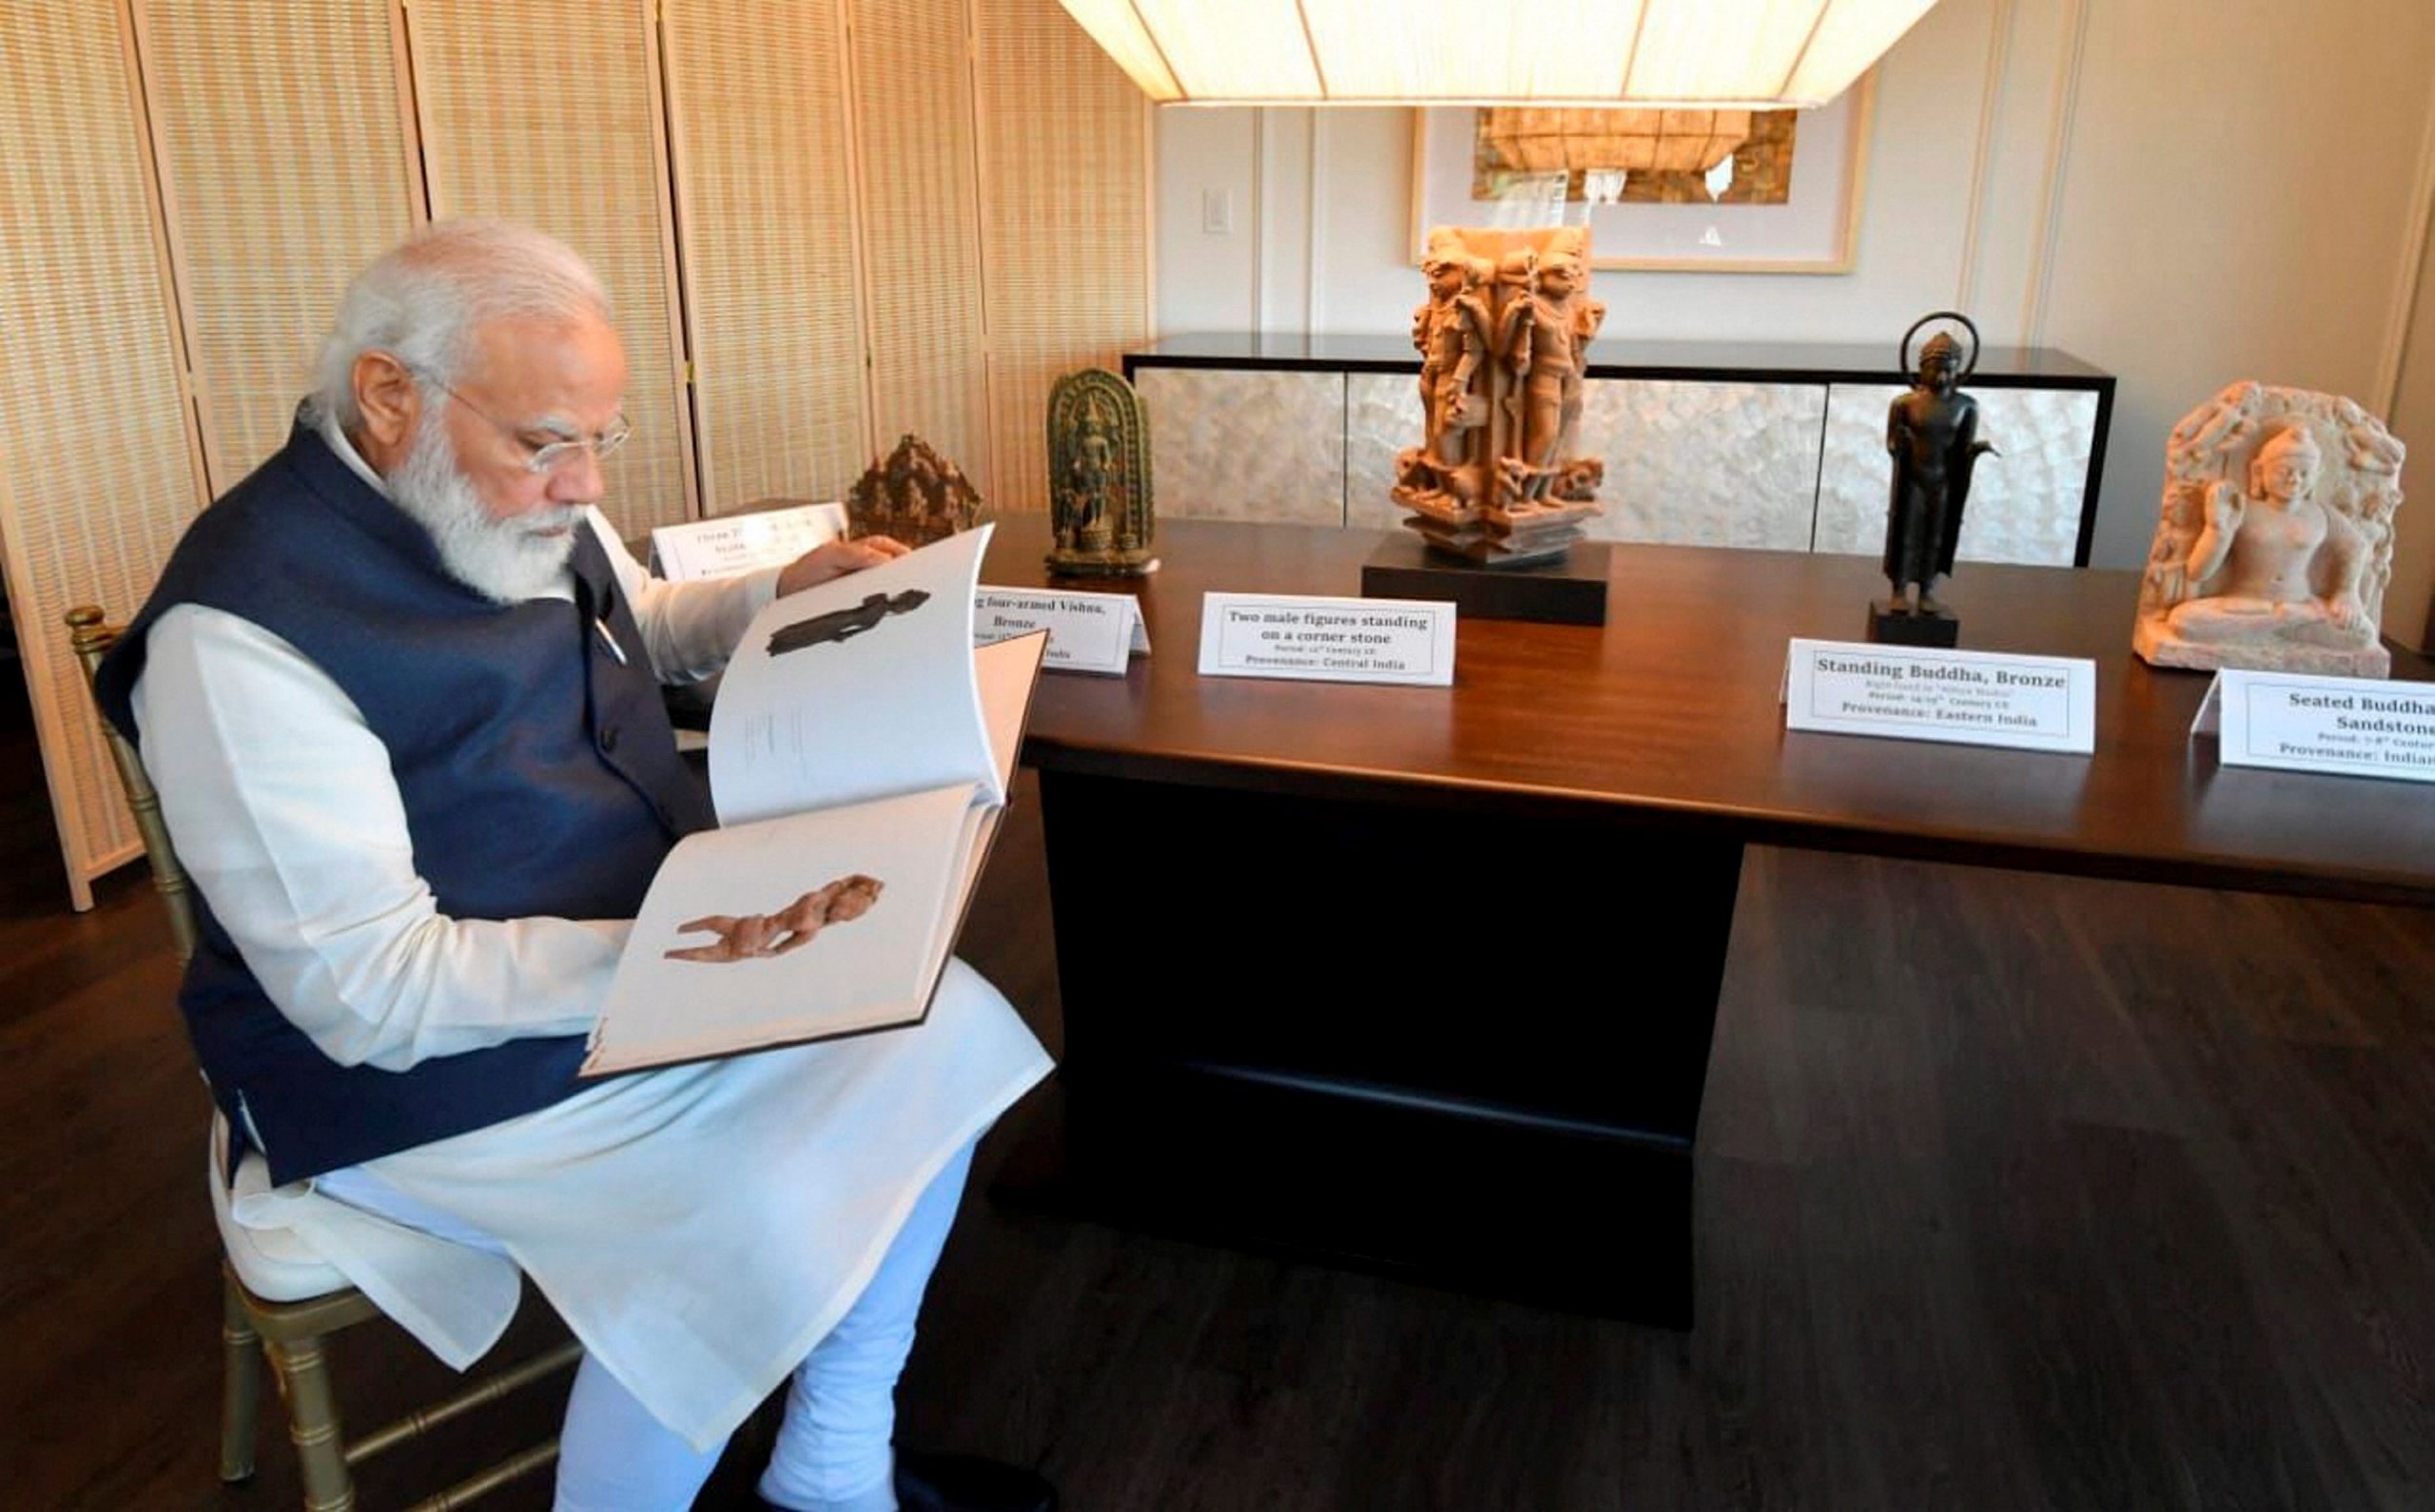 US hands over 157 antiques to India, PM Modi to bring them back